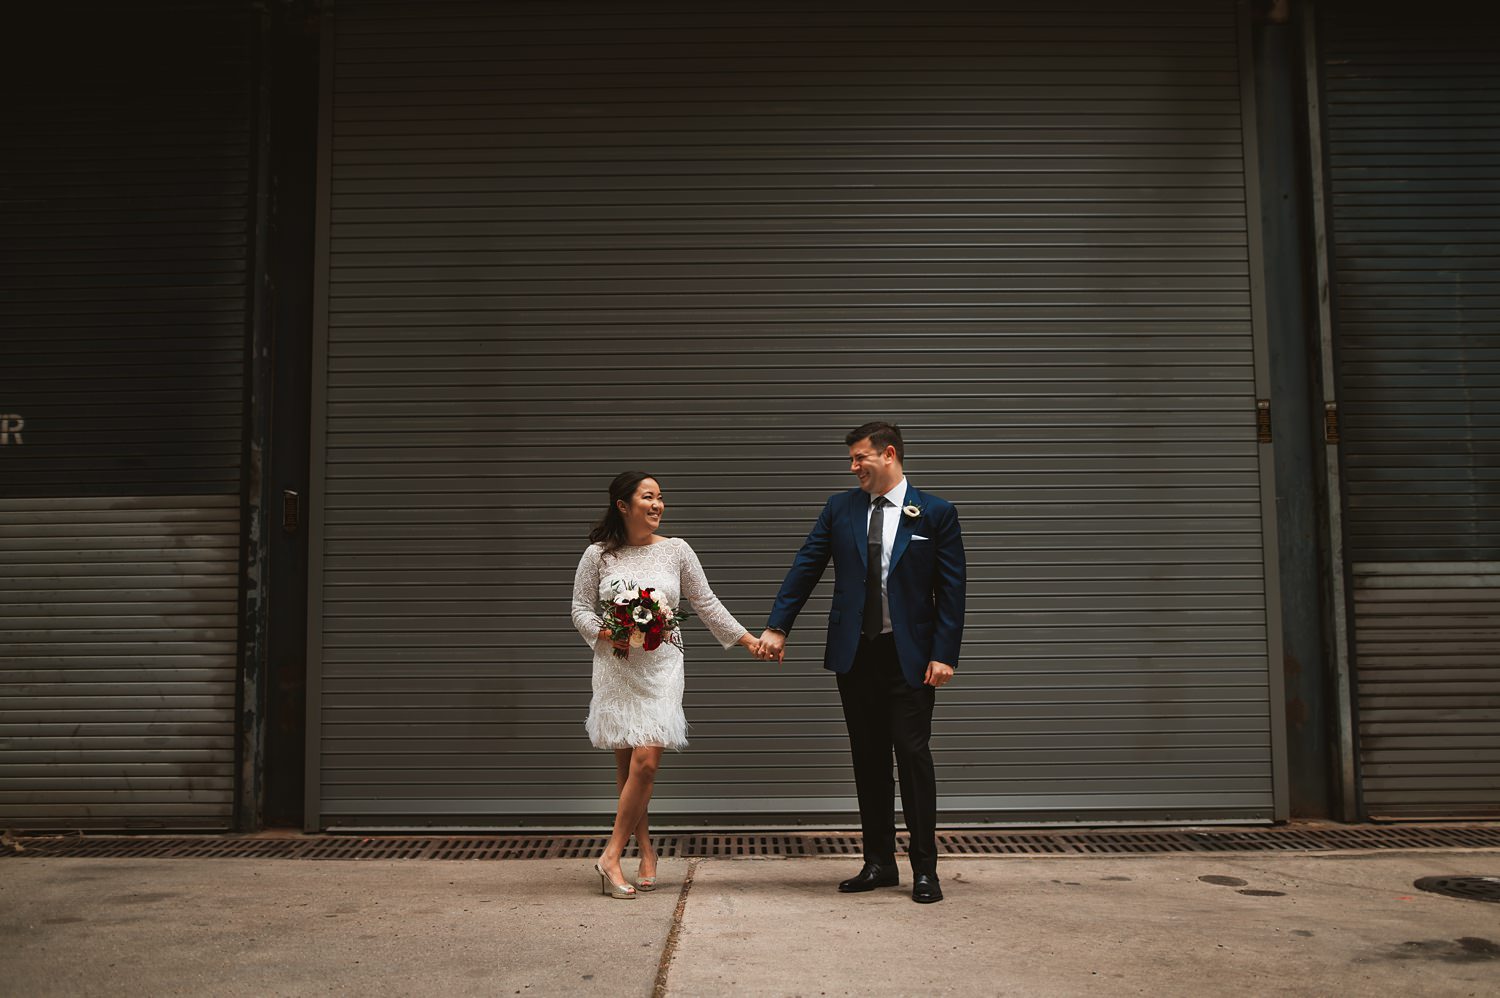 Chicago Courthouse Elopement wedding - The Adamkovi, city hall, photos in the loop area